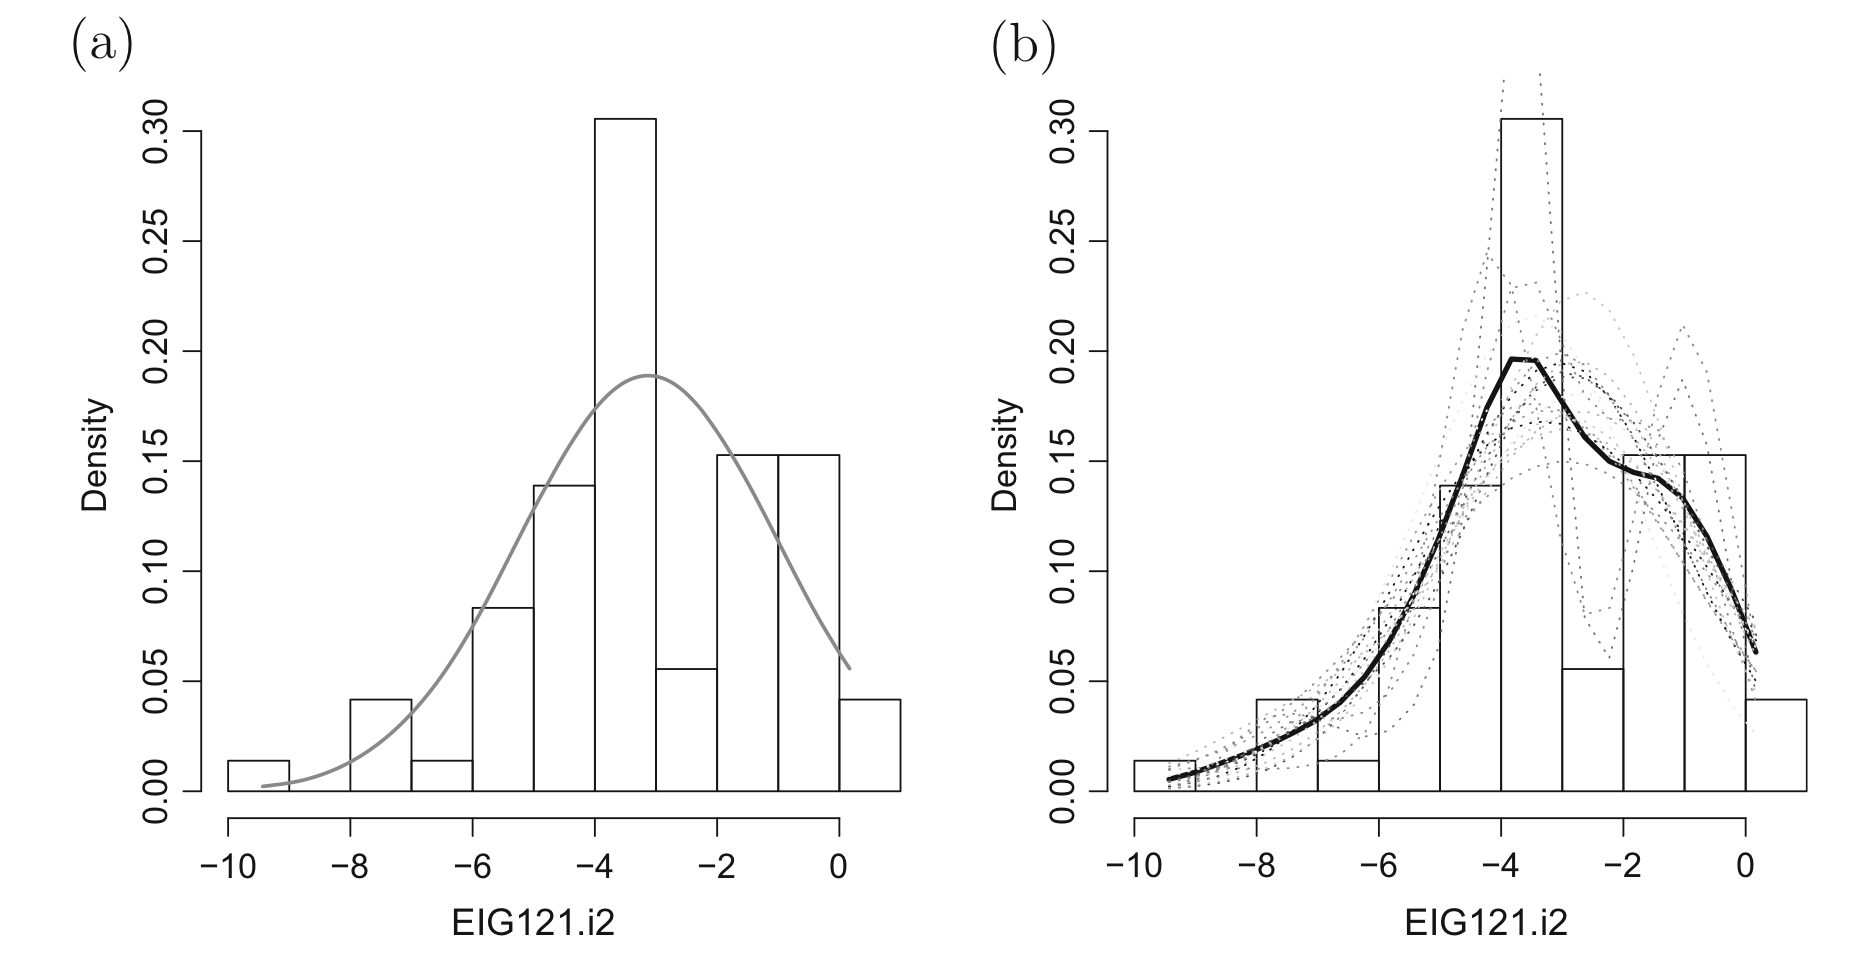 Inference on the unknown distribution $G$ under a parametric model (a) and nonparametric model (b). The historgram of the observed data is also displayed. The dotted line in (b) correspond to posterior draws.